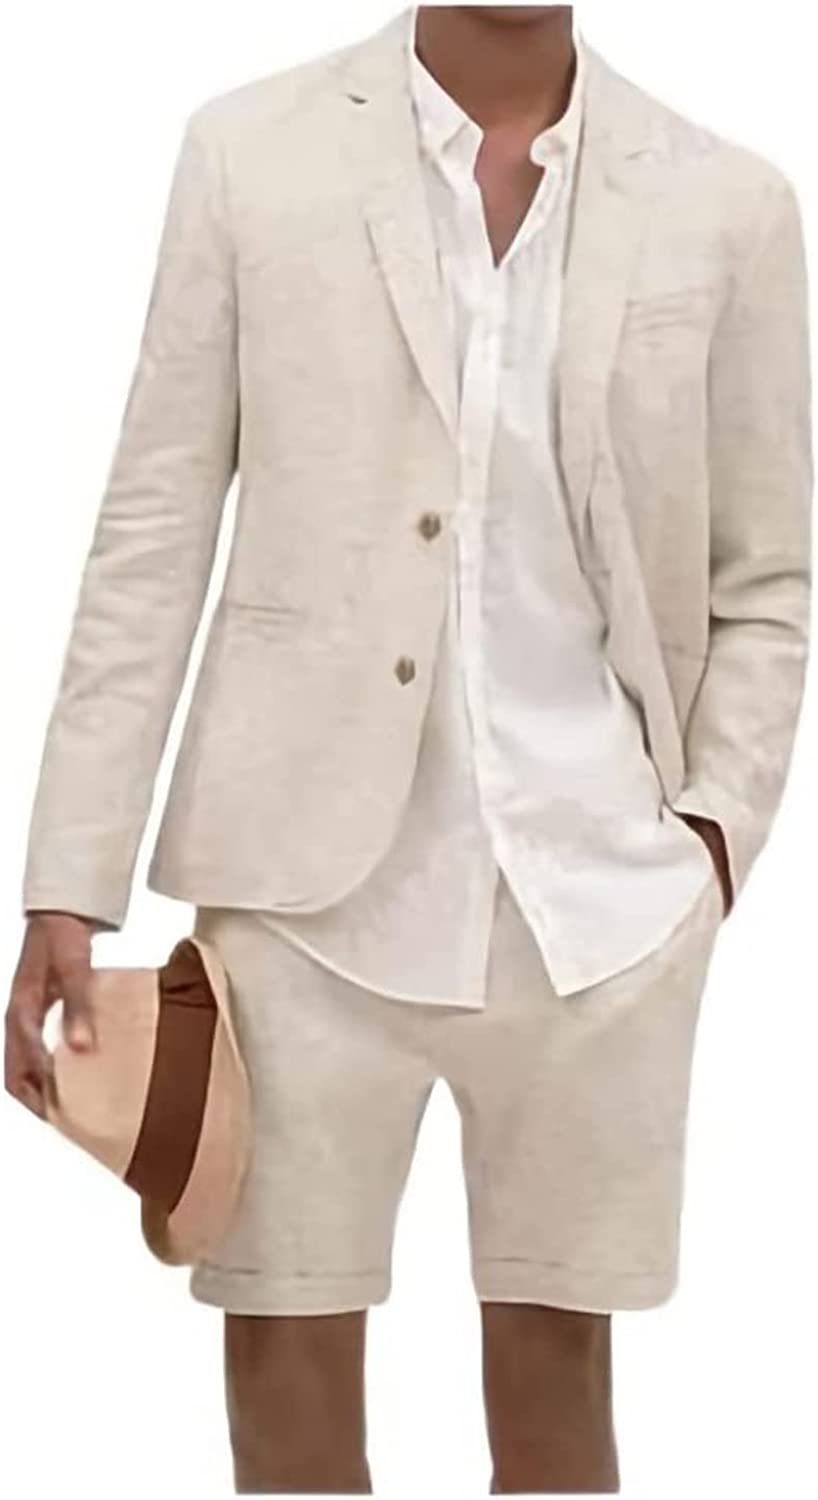 Wedding shorts suit for summer